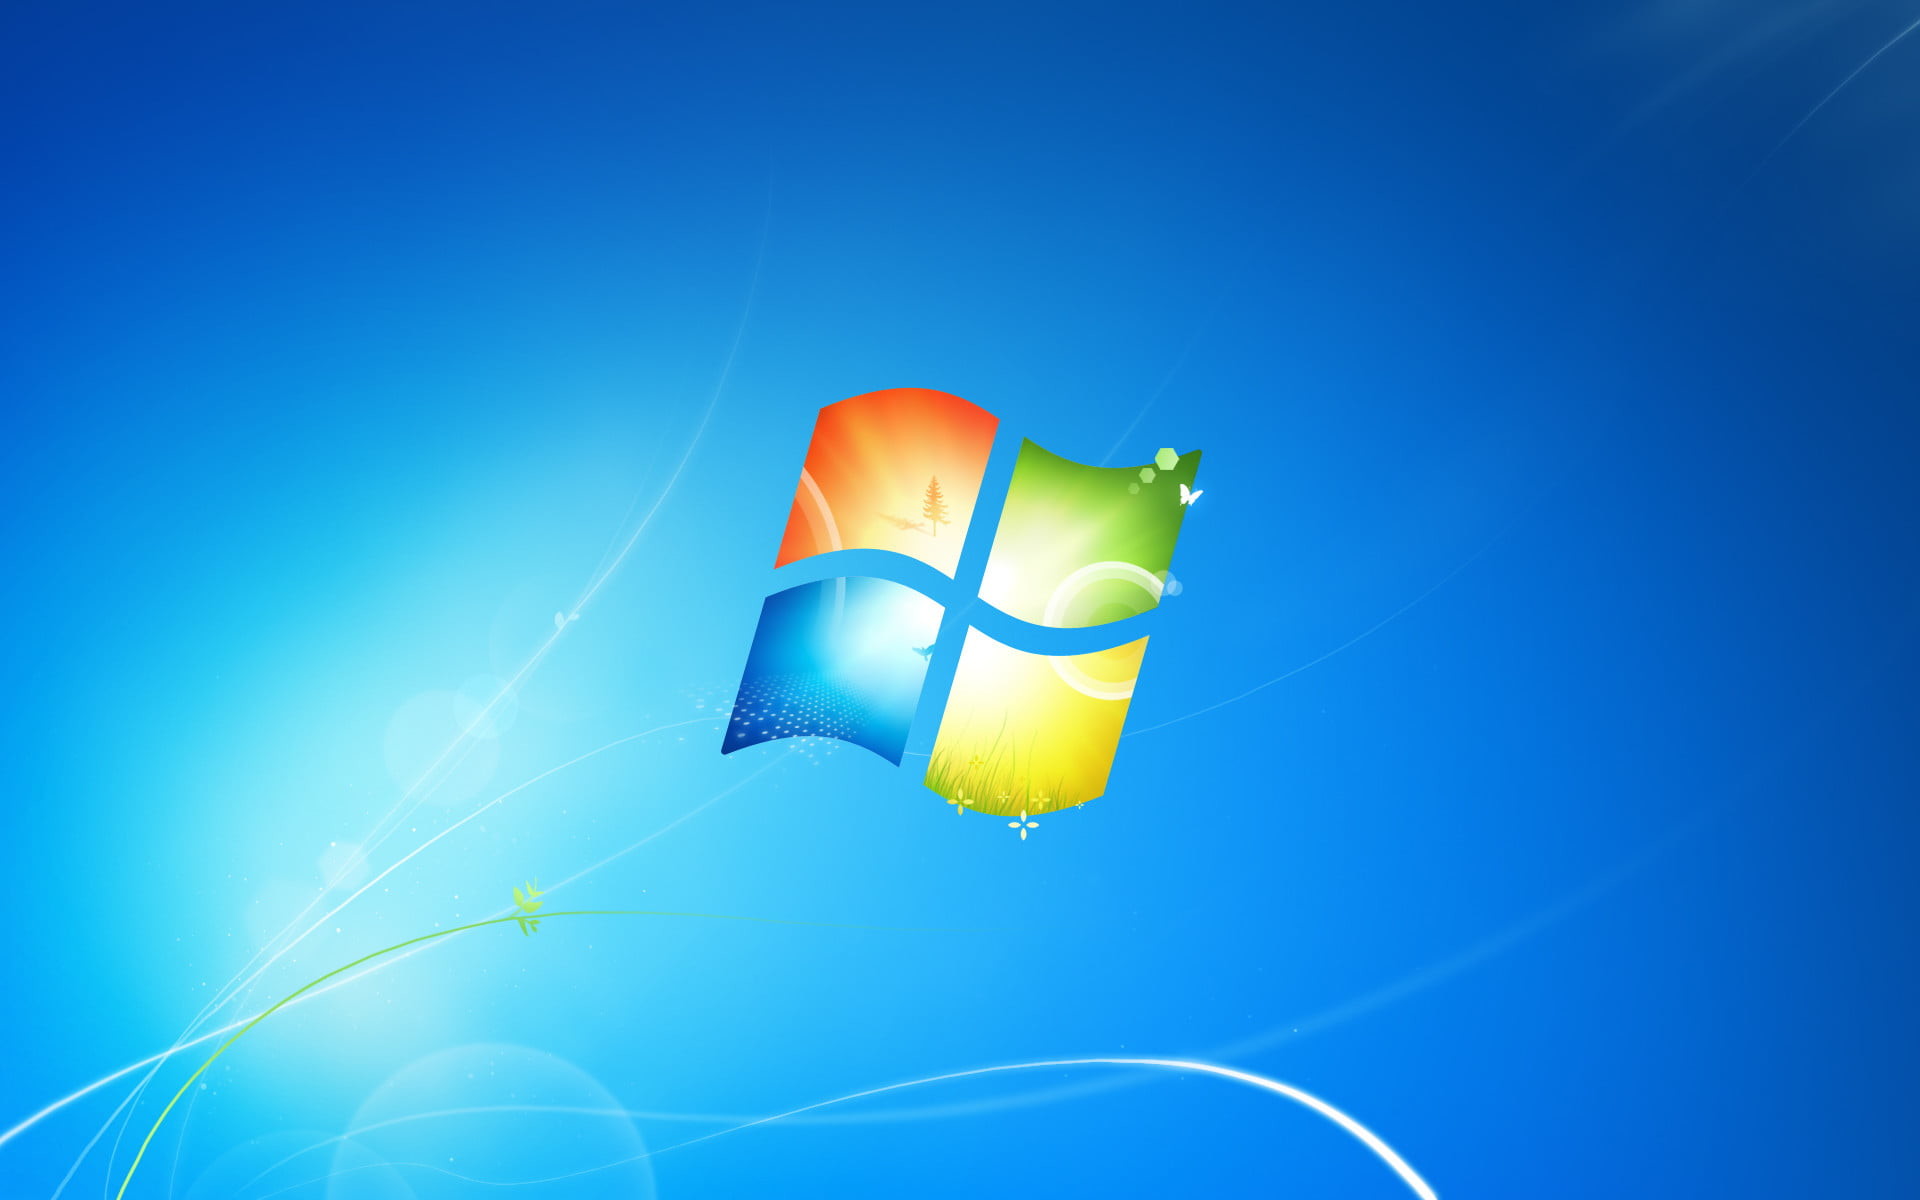 1920x1200 Sticking with Windows 7? Make sure you do these 5 things first